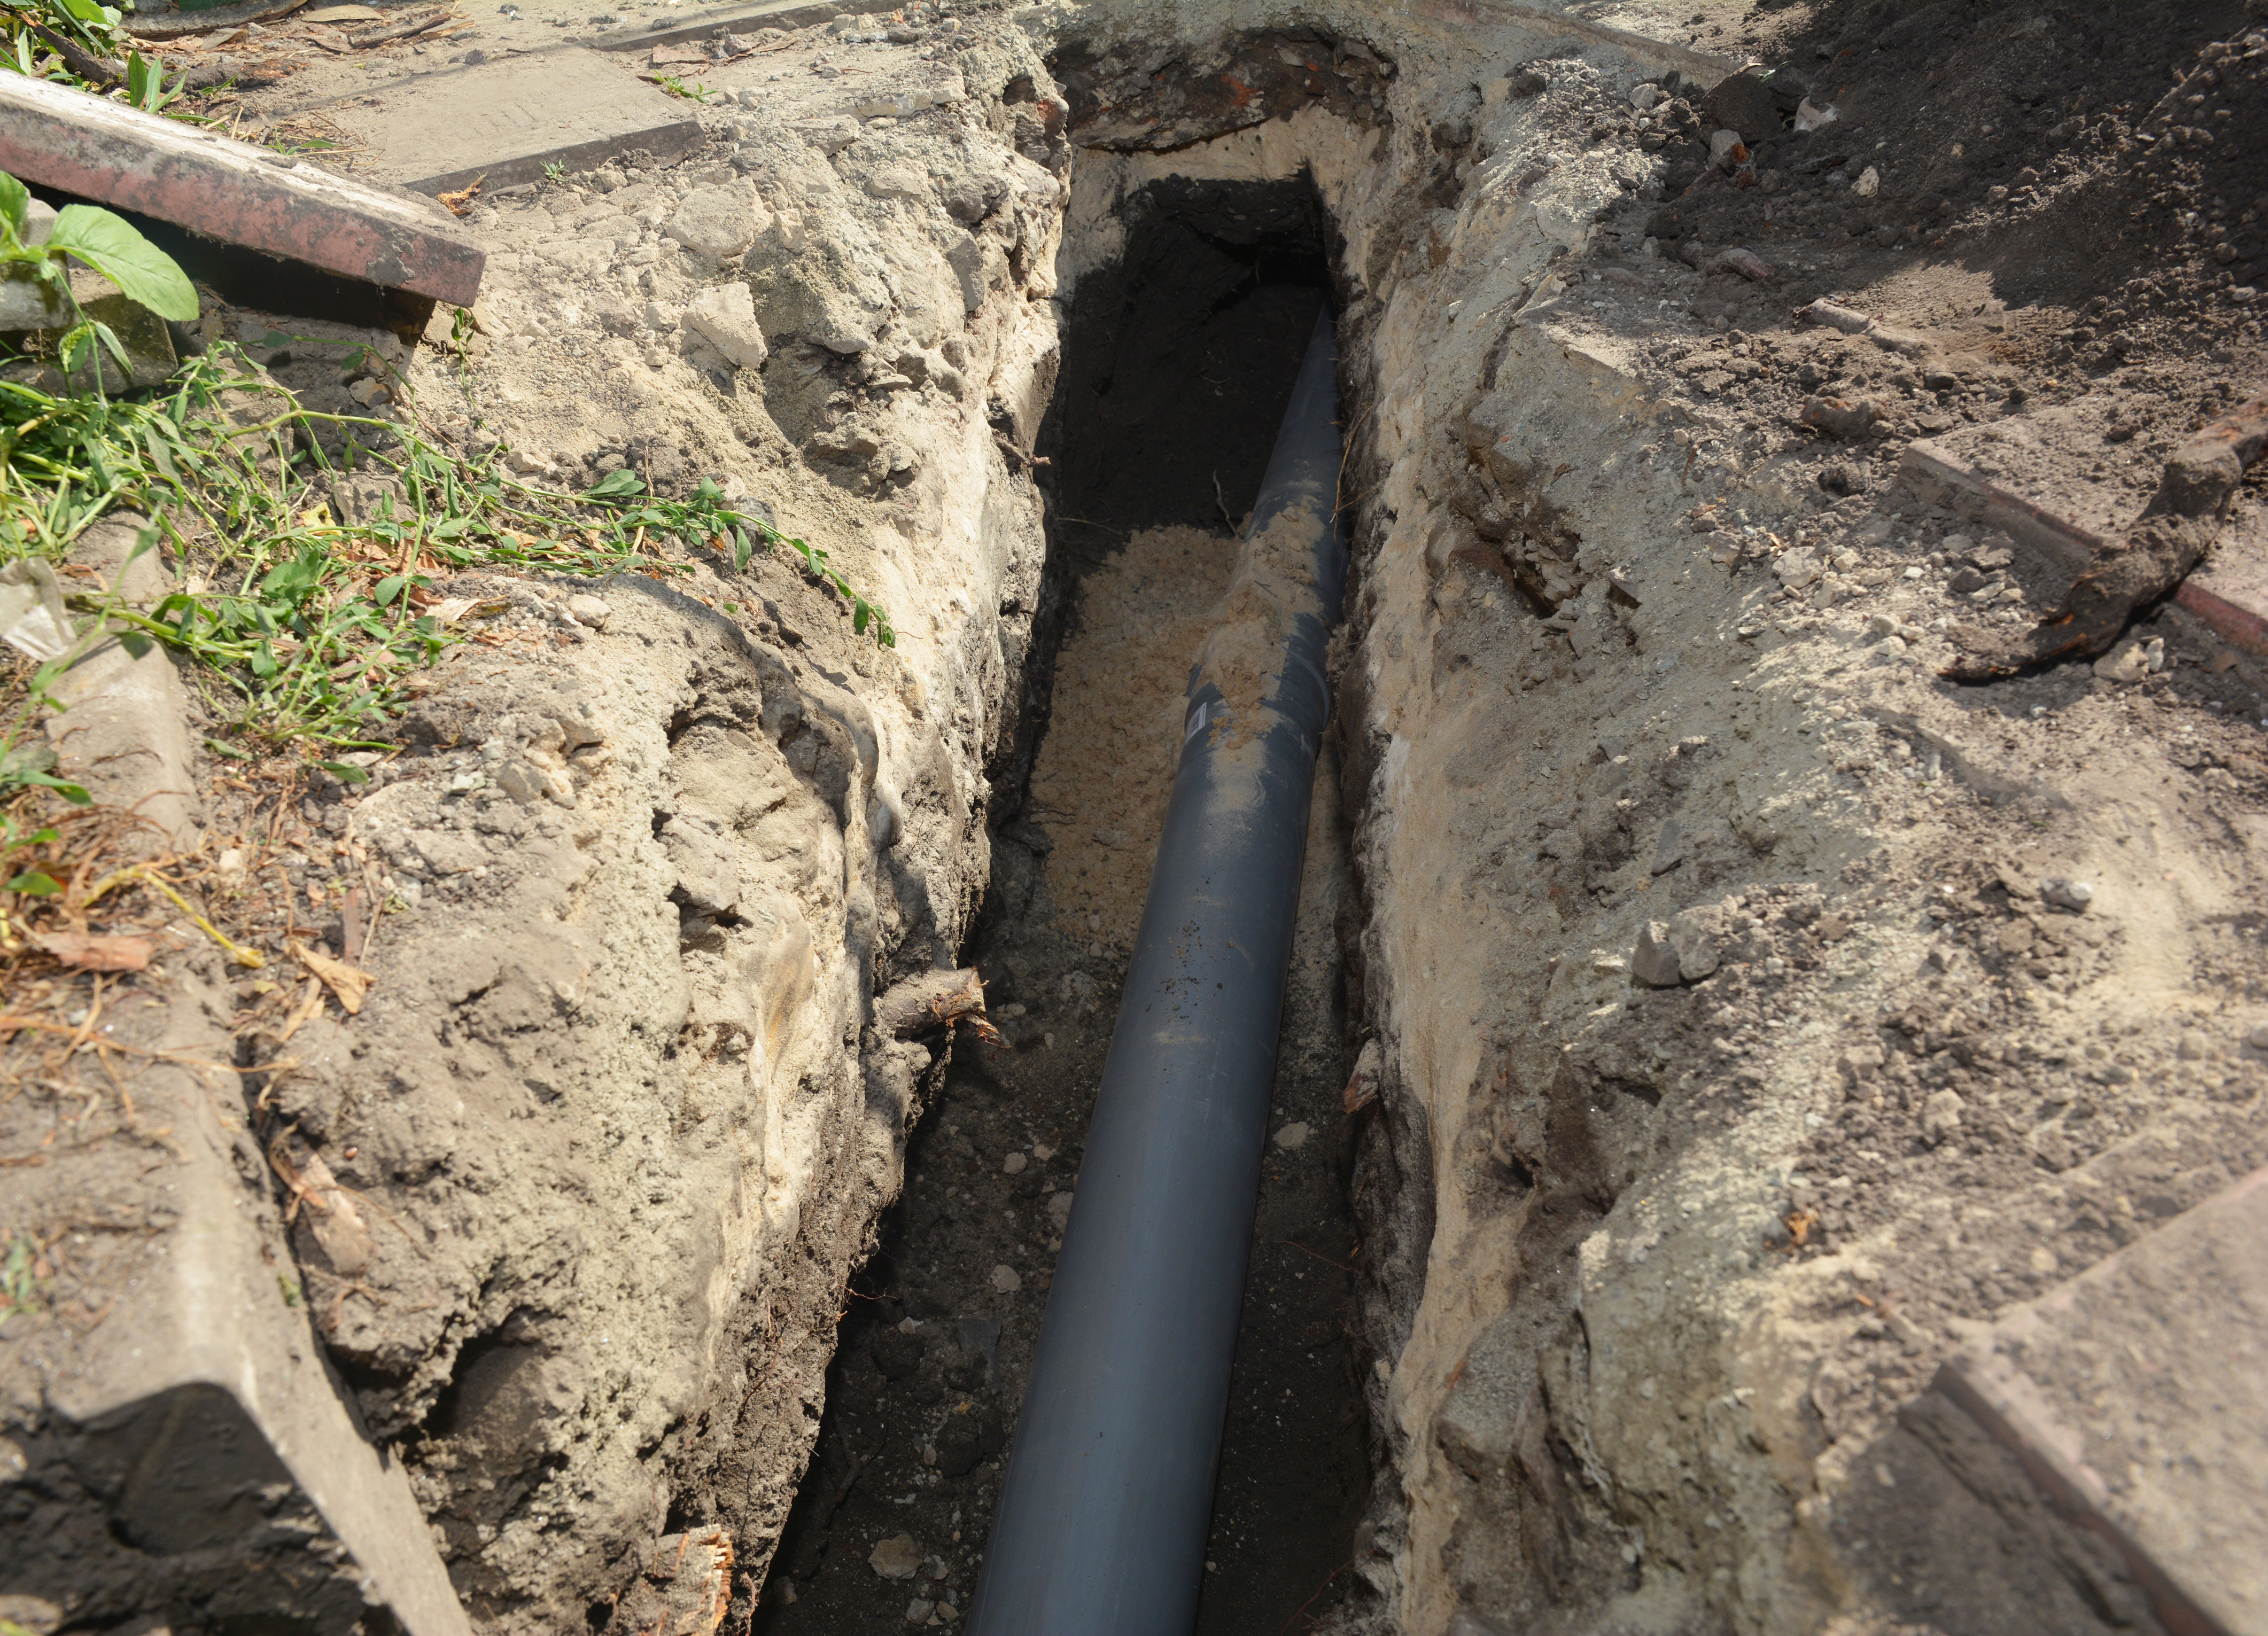 Sewer line replacement with trench excavated